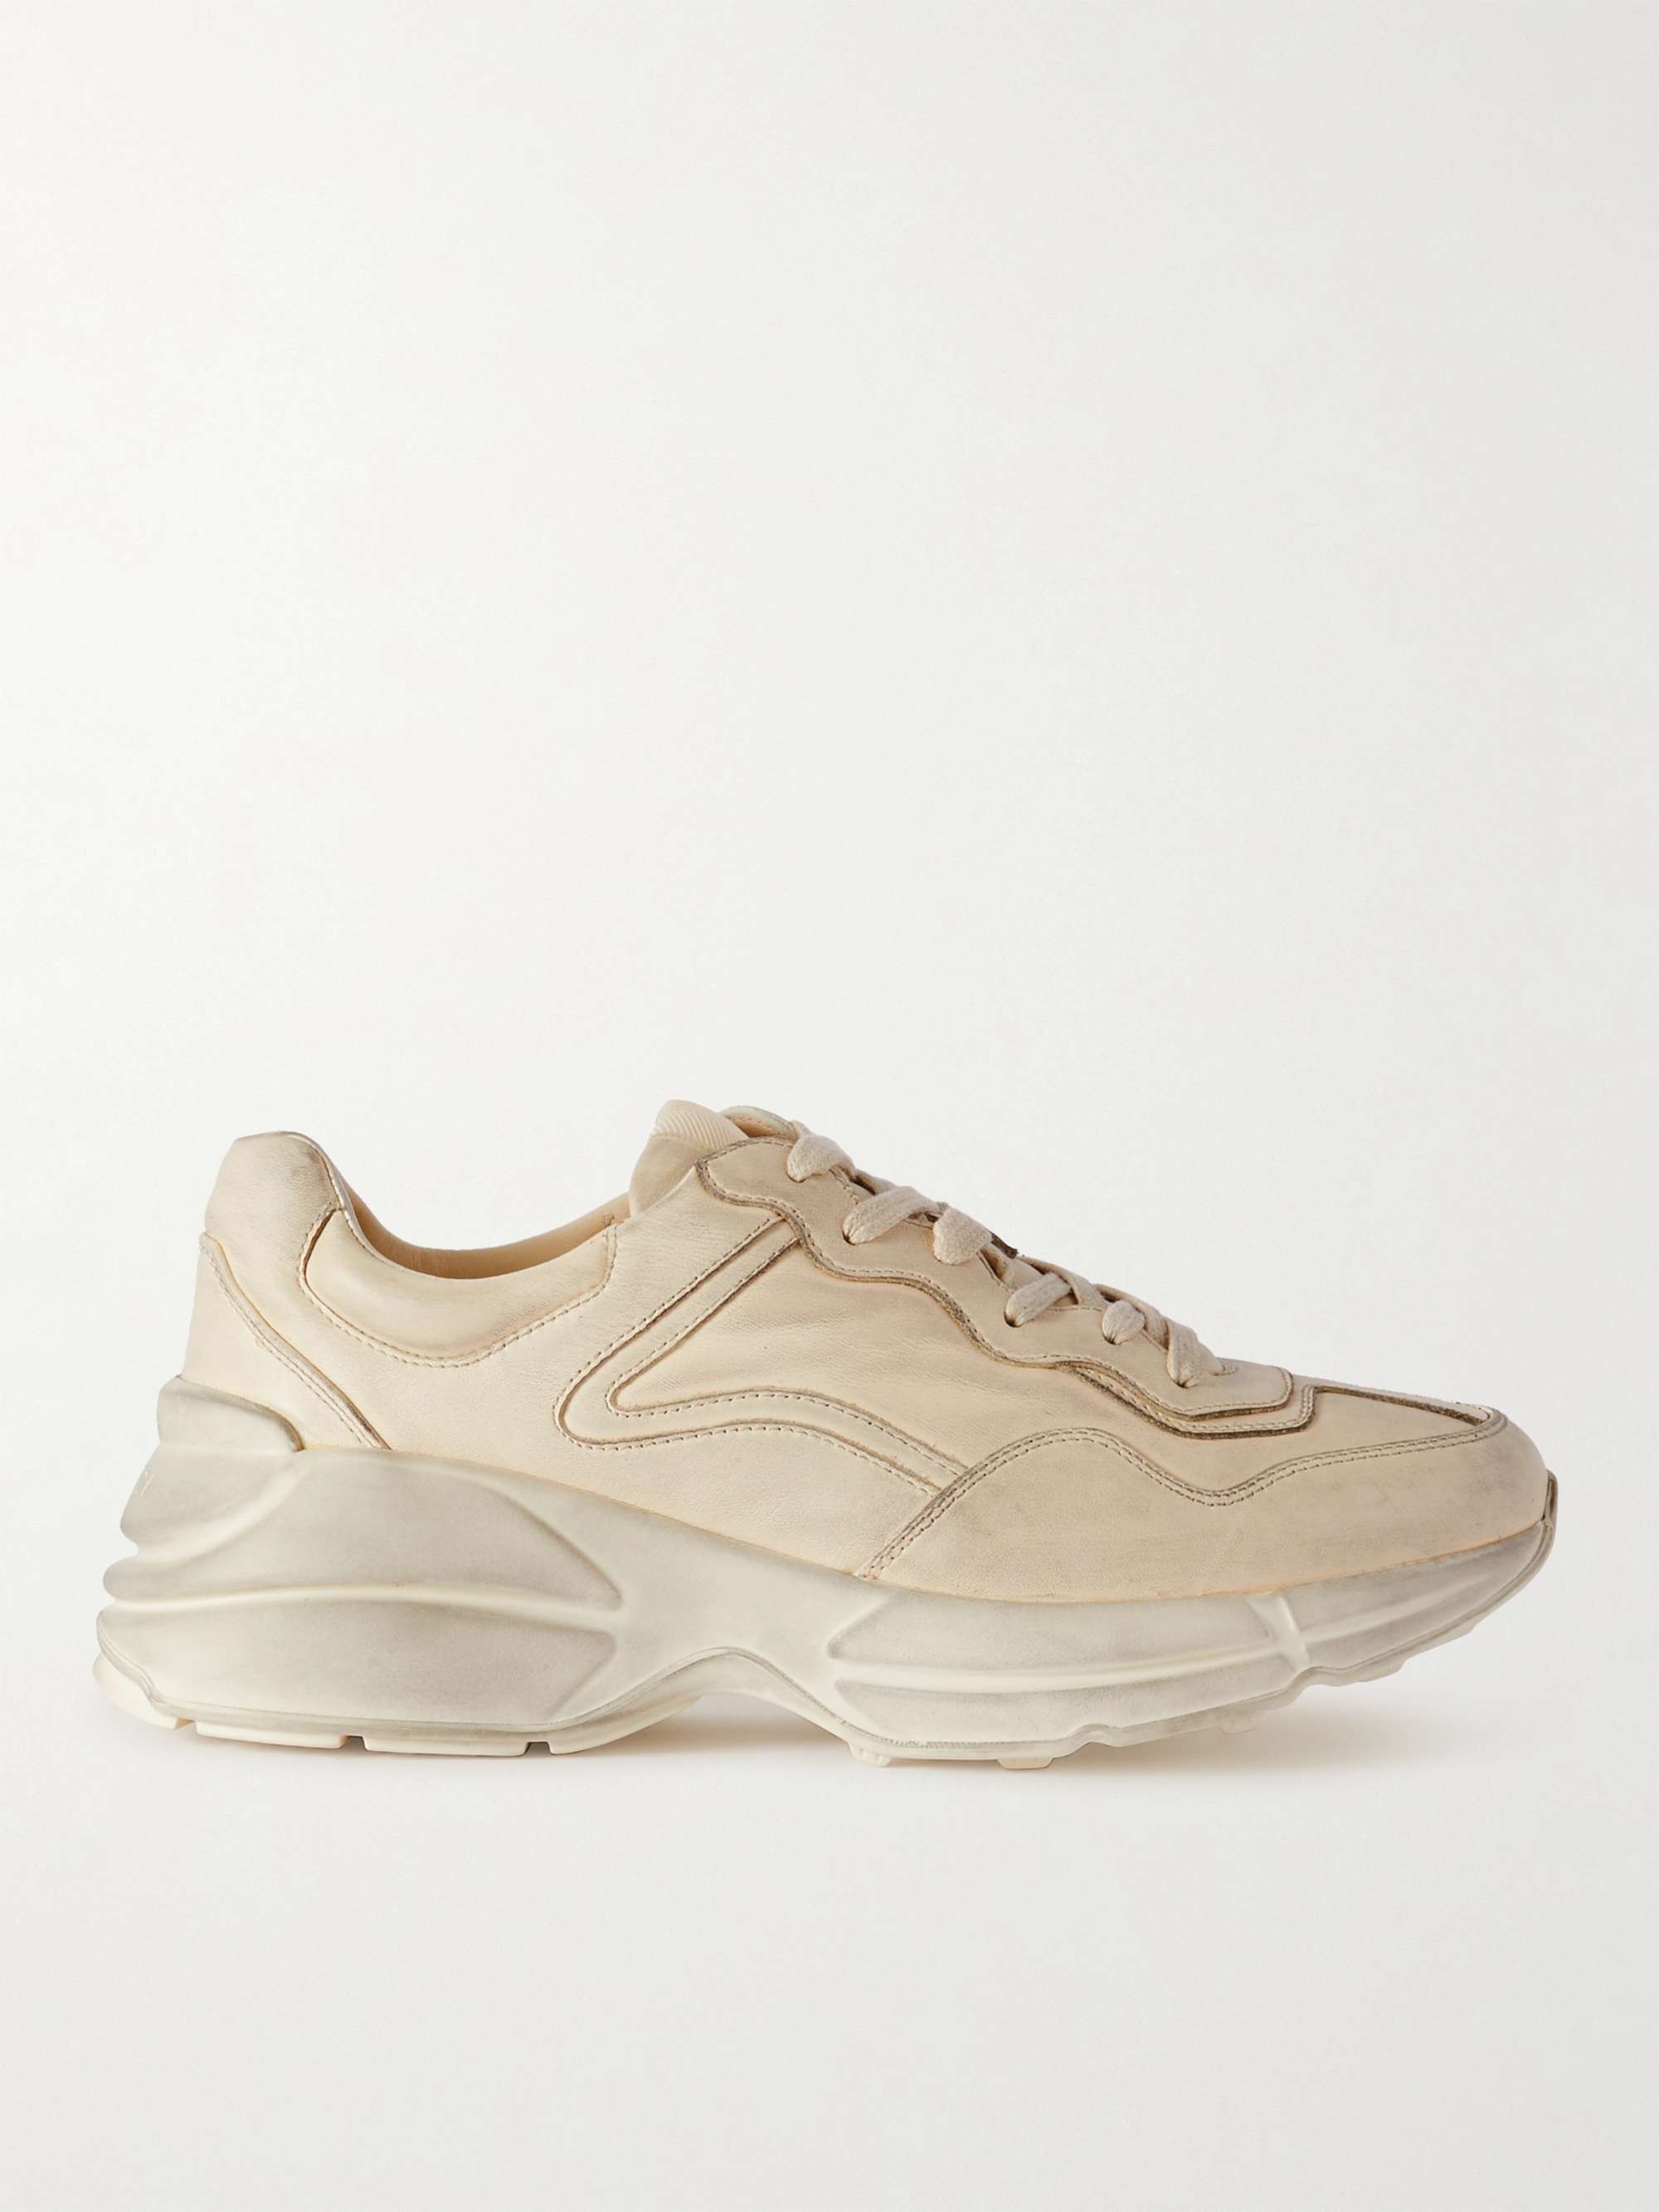 GUCCI Rhyton Distressed Leather Sneakers